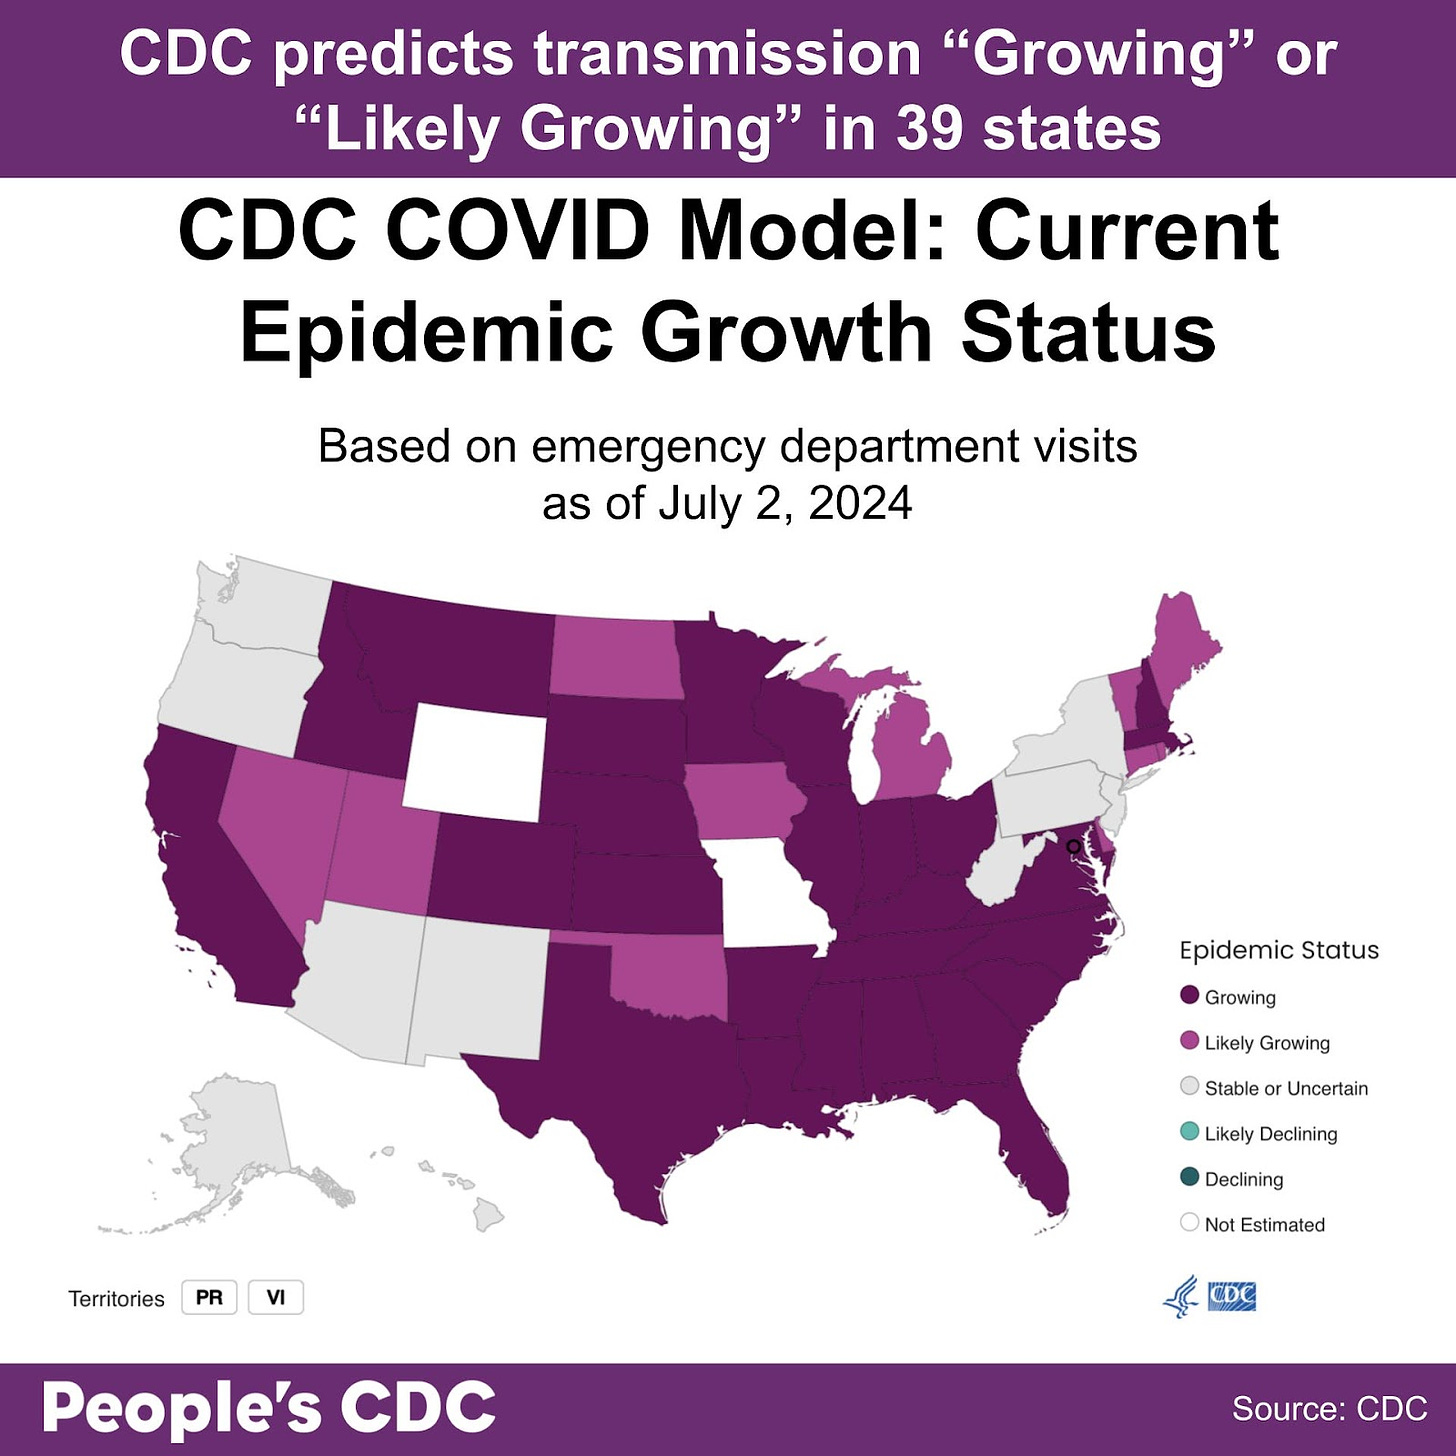 A map of the United States color-coded in shades of purple and gray displaying the CDC COVID Model: Current Epidemic Growth Status based on emergency department visits as of July 2, 2024, where deeper tones correlate to higher rates of growth and gray indicates “Stable or Uncertain”. States without predictions are represented in white. 39 States are “Growing” or “Likely Growing”. All other states and territories are either are “Stable or Uncertain” or did not receive estimates. Text above map reads “CDC Predicts transmission is “Growing” or  “Likely Growing” in 39 states”  People’s CDC. Source: CDC.”